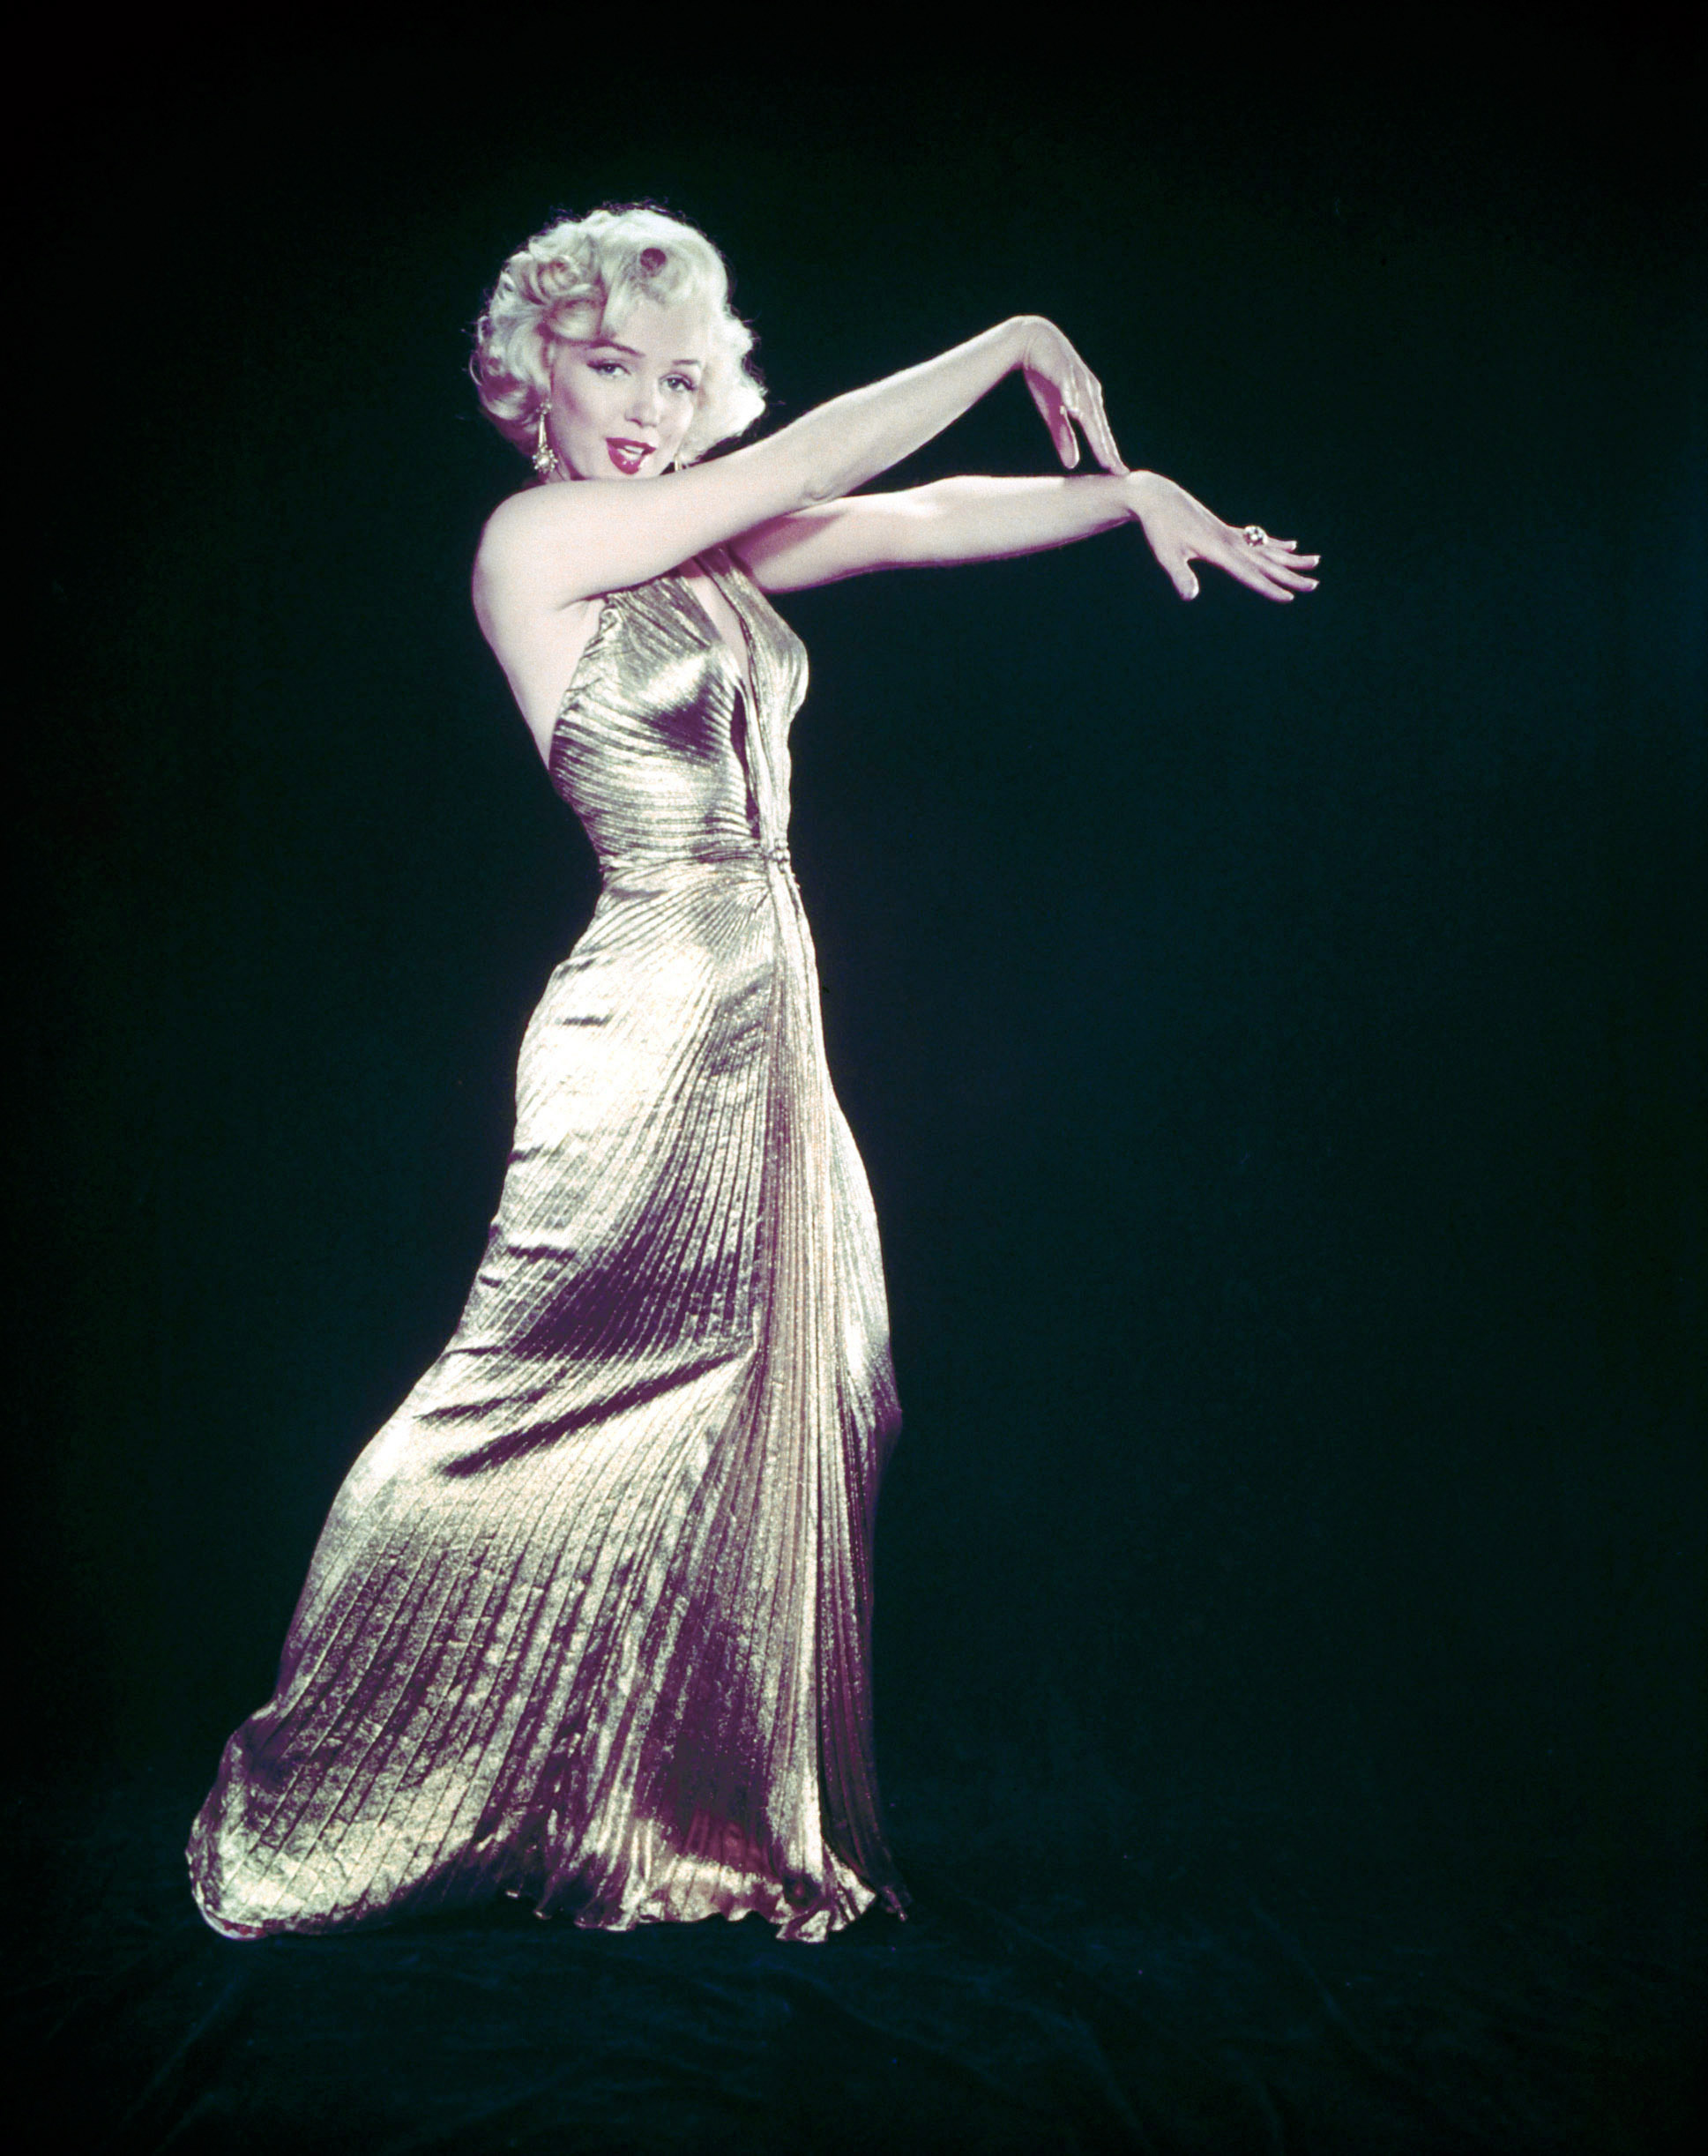 Actress Marilyn Monroe posing wearing her famous gold lame gown for the motion picture "Gentlemen Prefer Blondes."